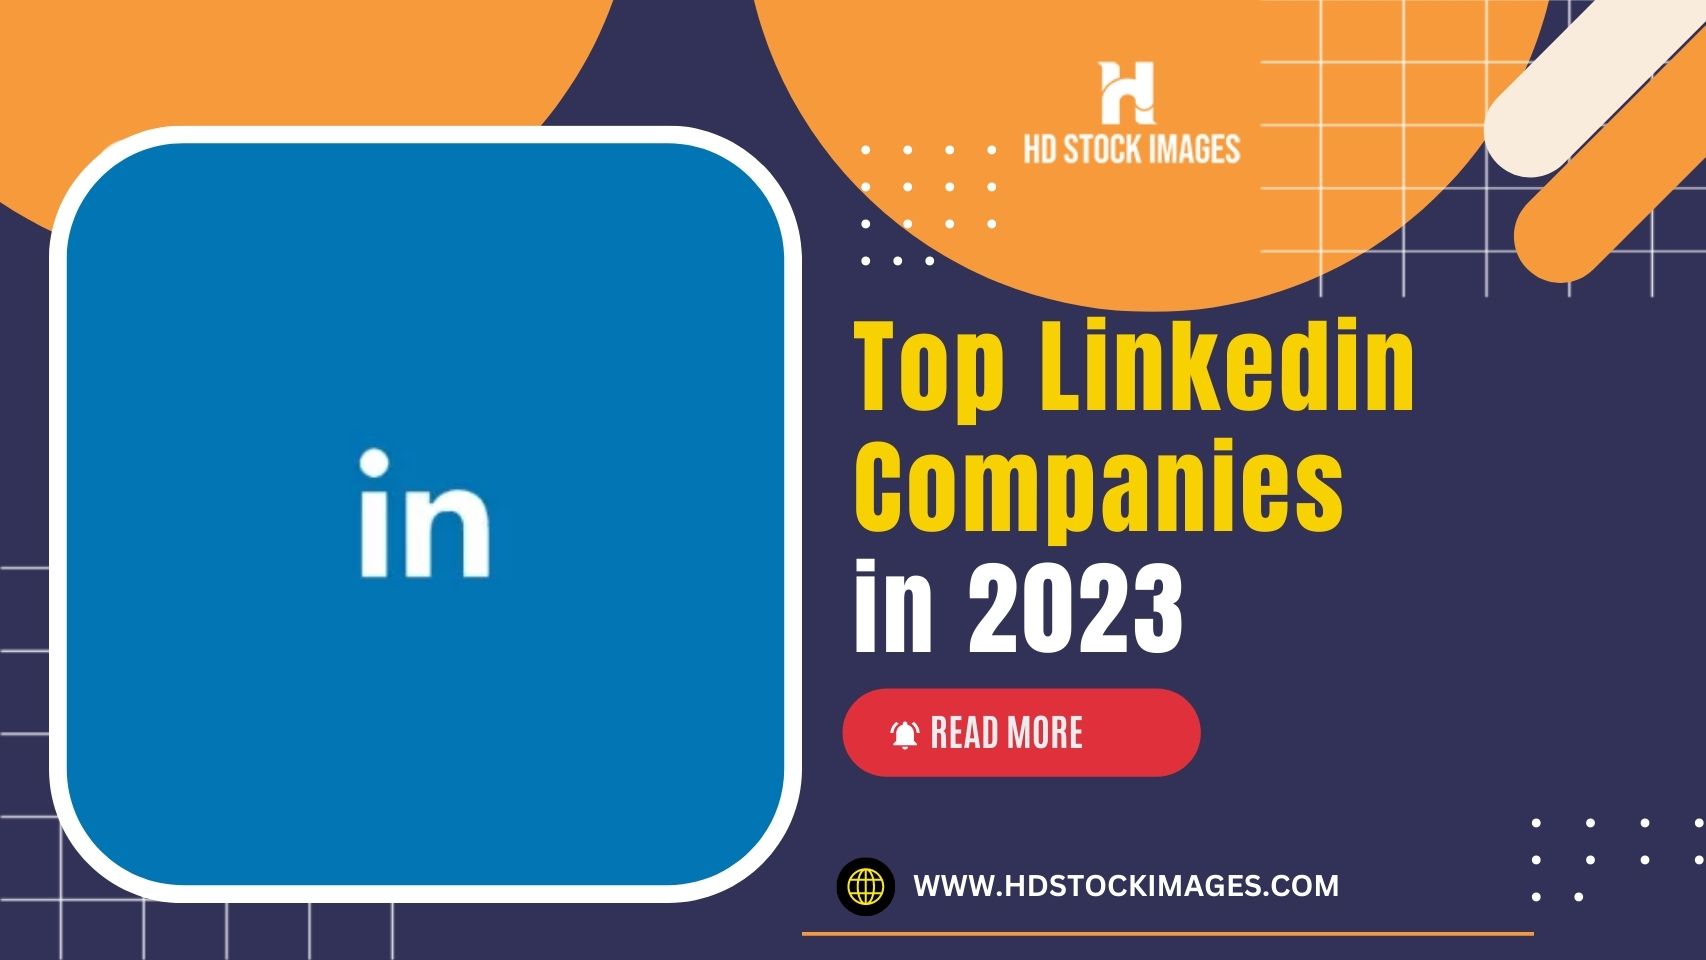 an image of List of Top Linkedin Companies in 2023